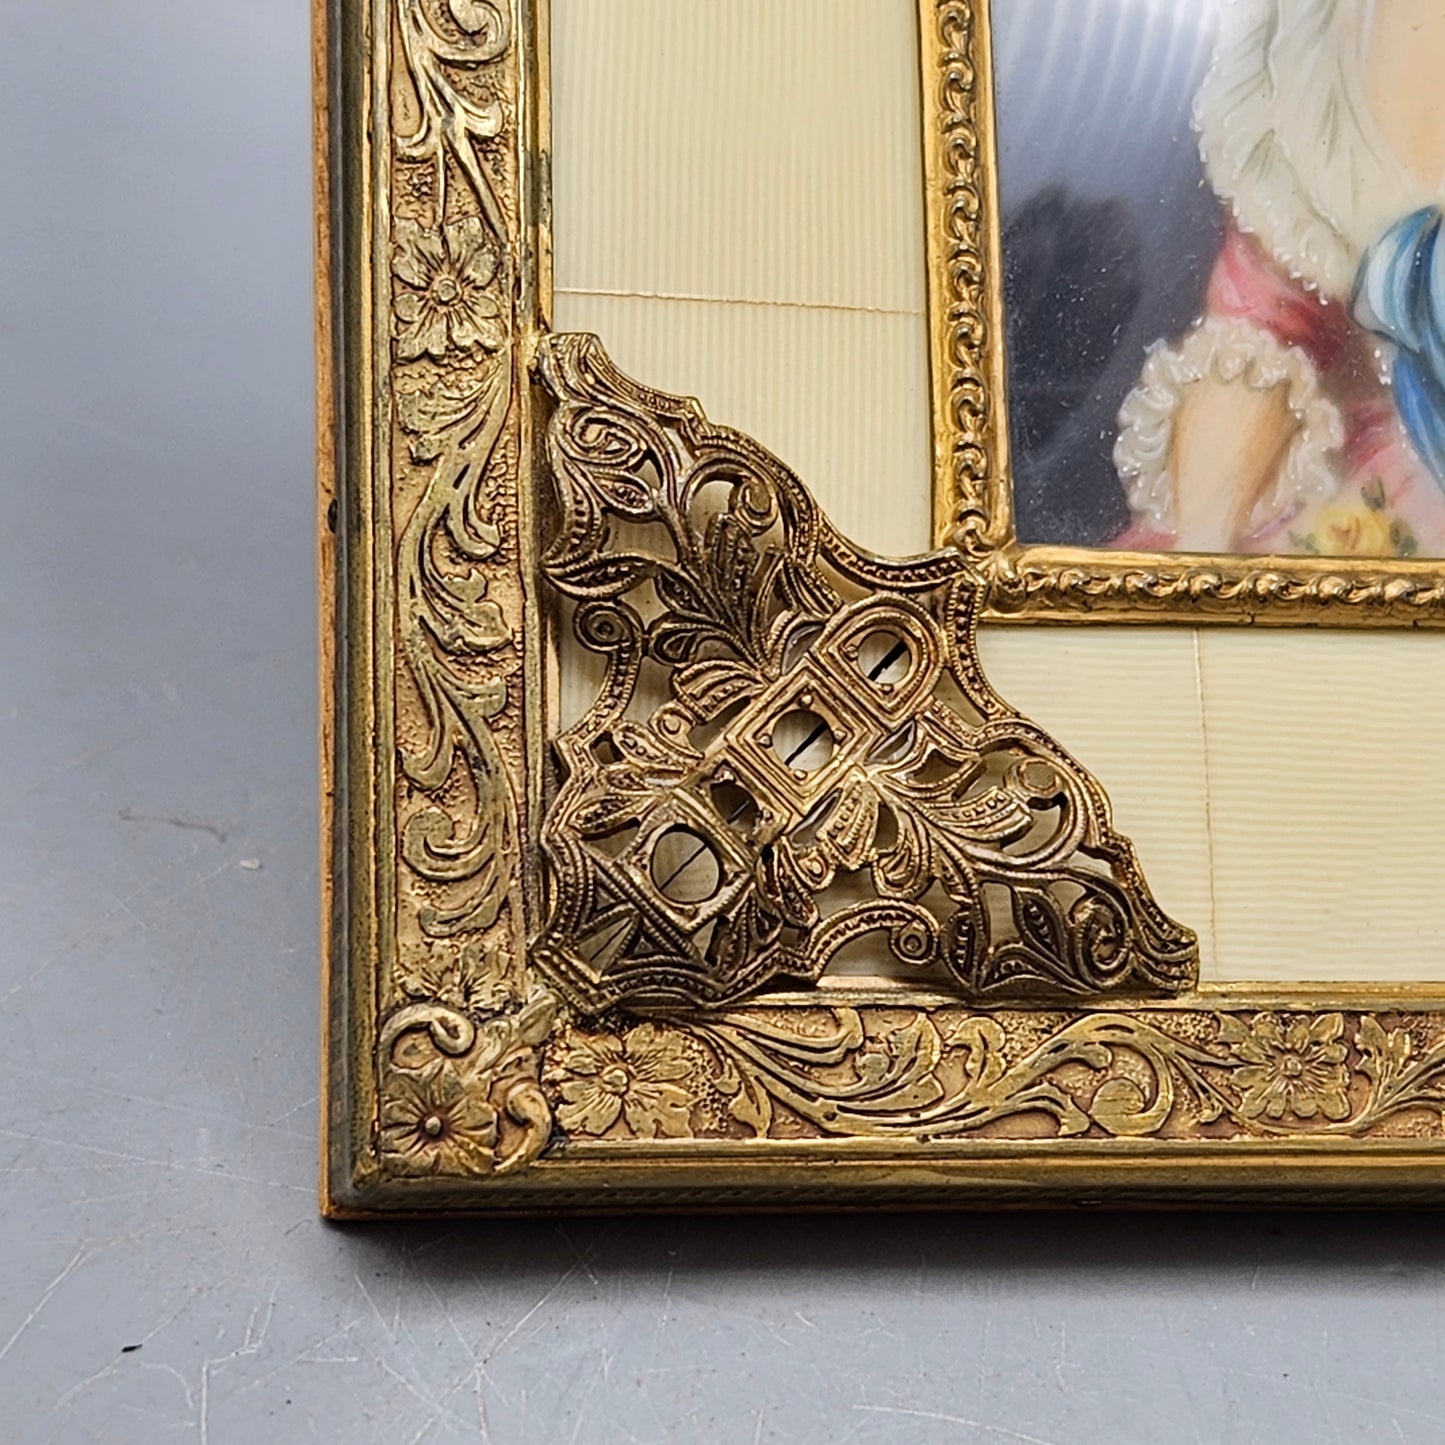 Antique Framed French Portrait of Woman in Ornate Gold Frame with Bone Design